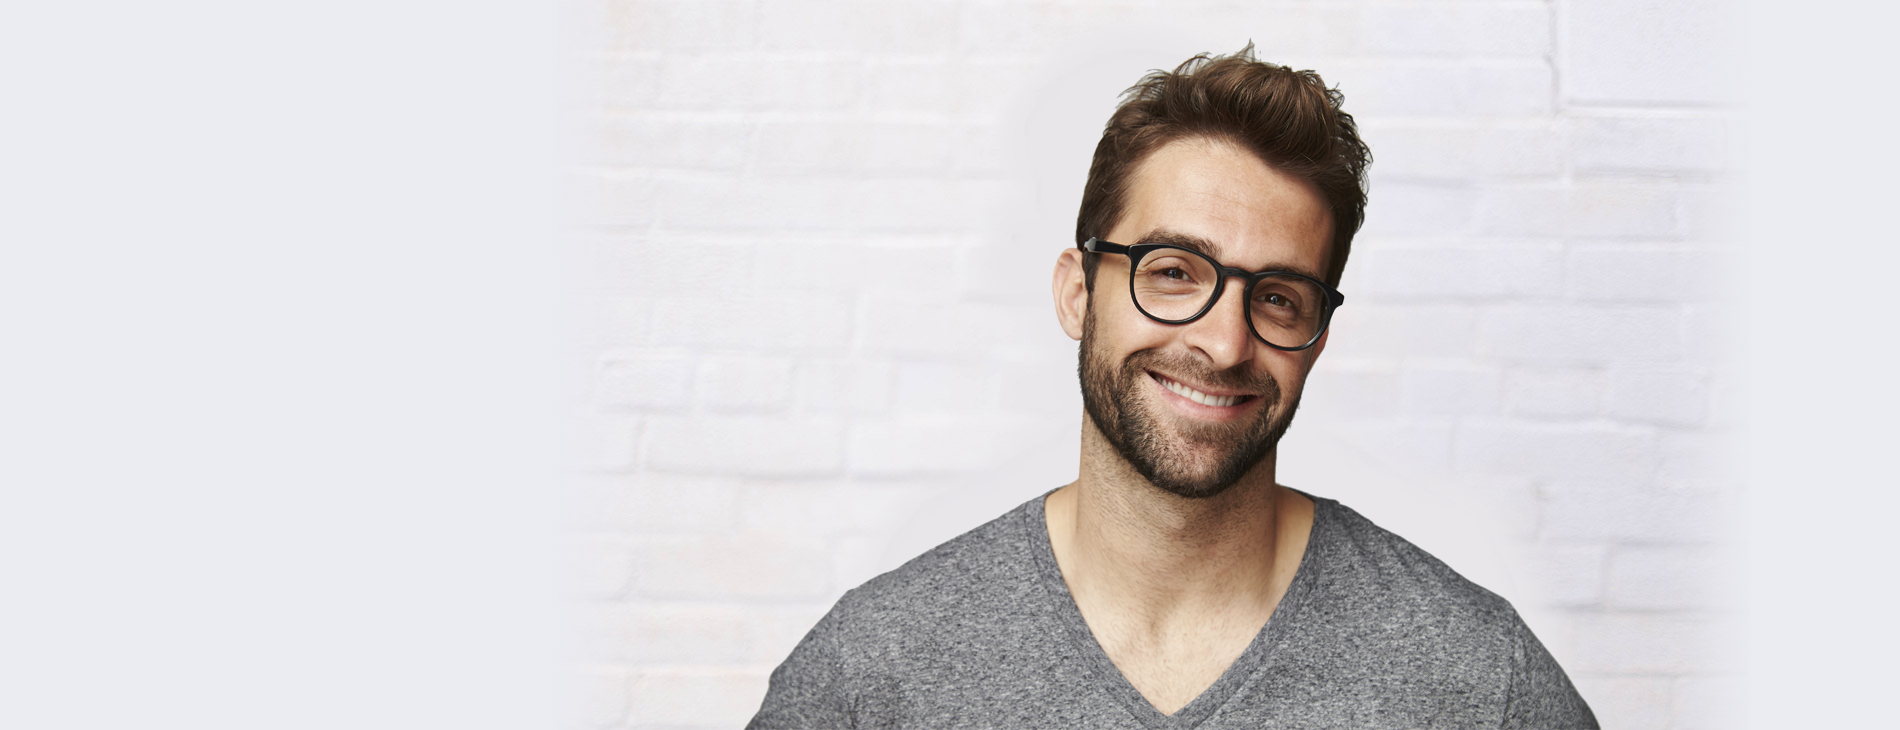 A man smiling and ready embrace the next generation of CRM with one of our tailored solutions